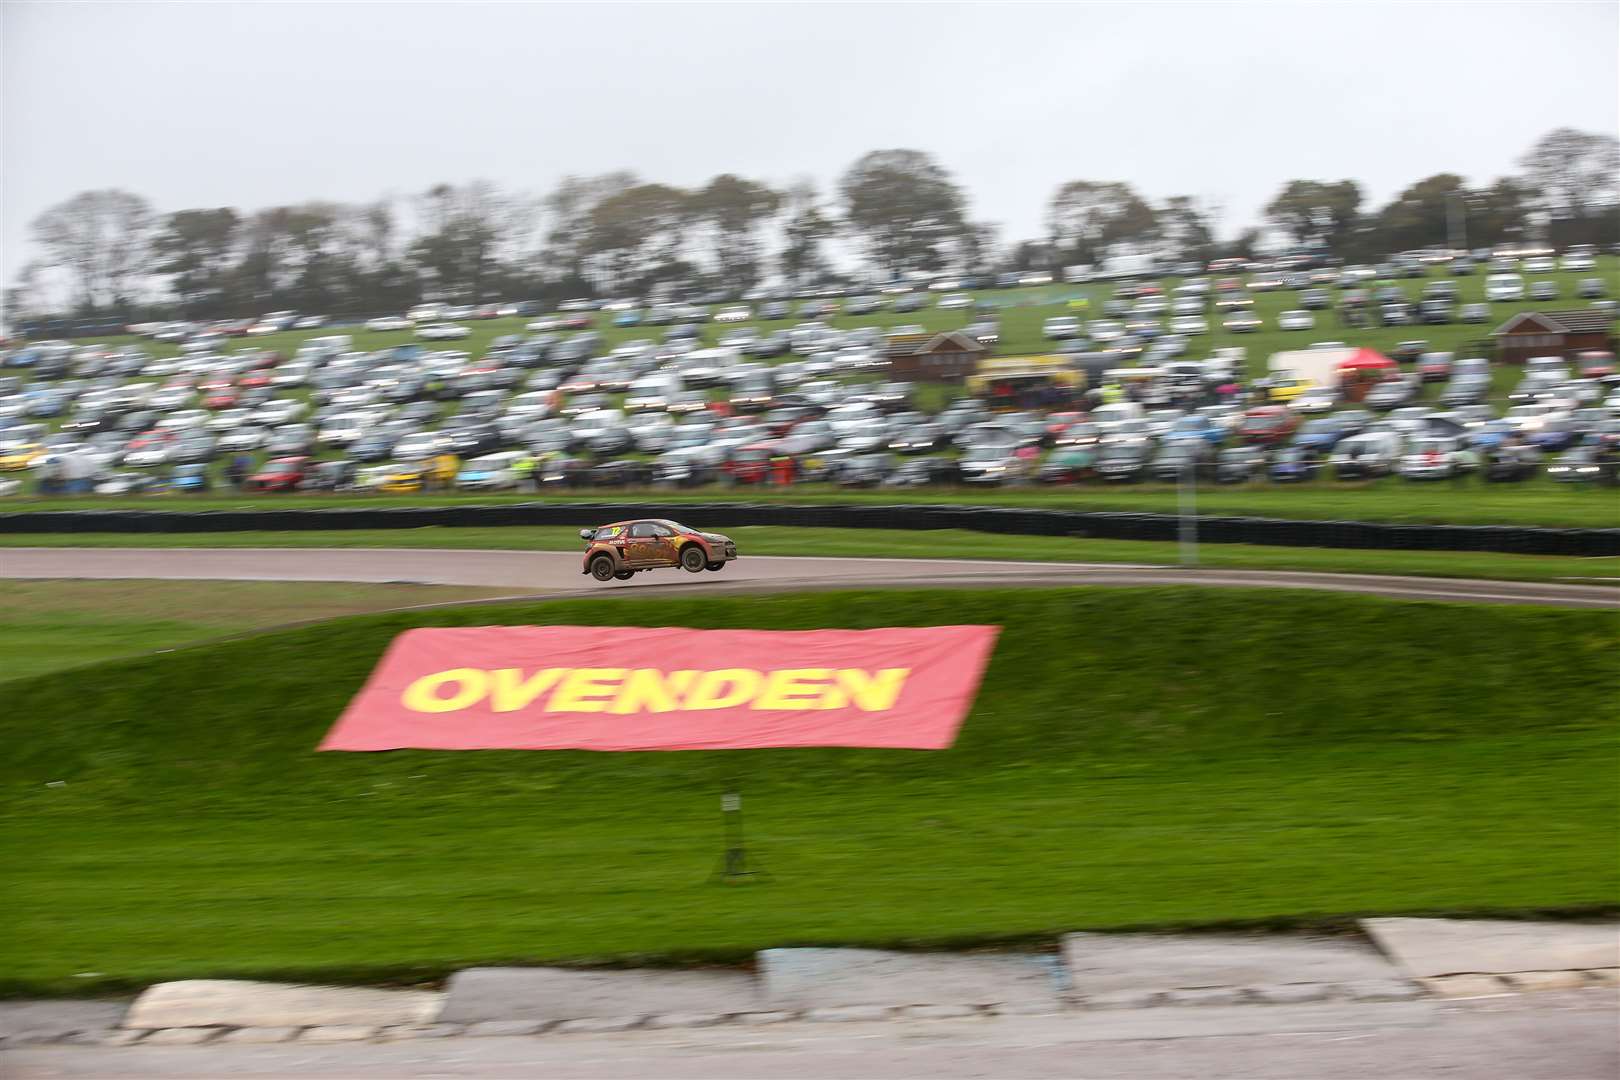 Tristan Ovenden leaping over Lydden's new rallycross jump in November last year. Picture: Matt Bristow